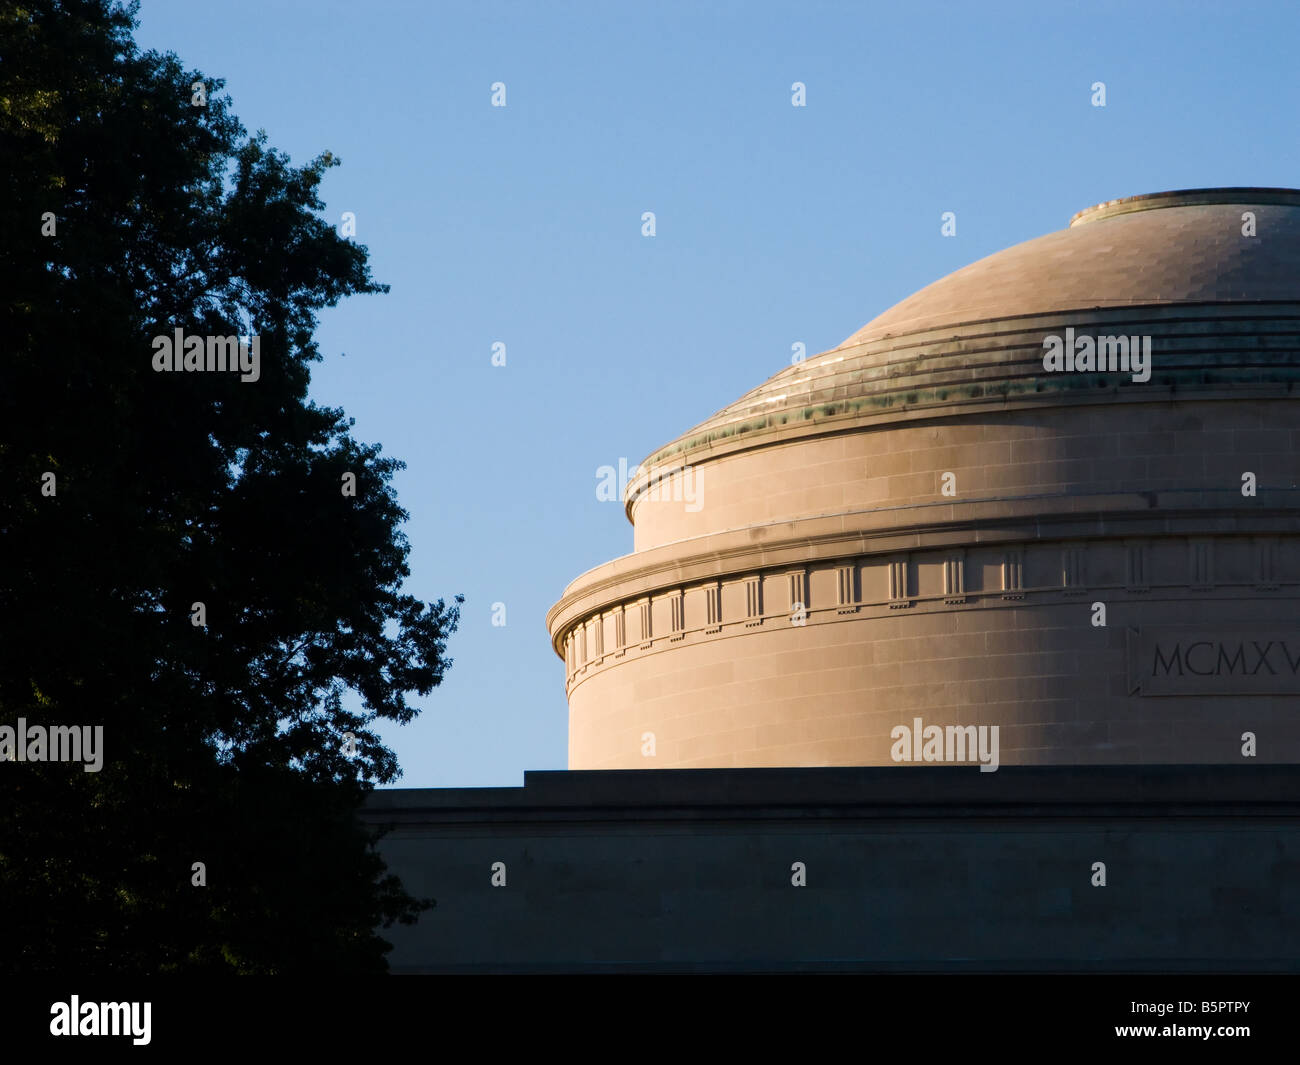 The Great Dome on the Massachusetts Institute of Technology campus in Cambridge MA as seen on the afternoon of 9 20 08 Stock Photo